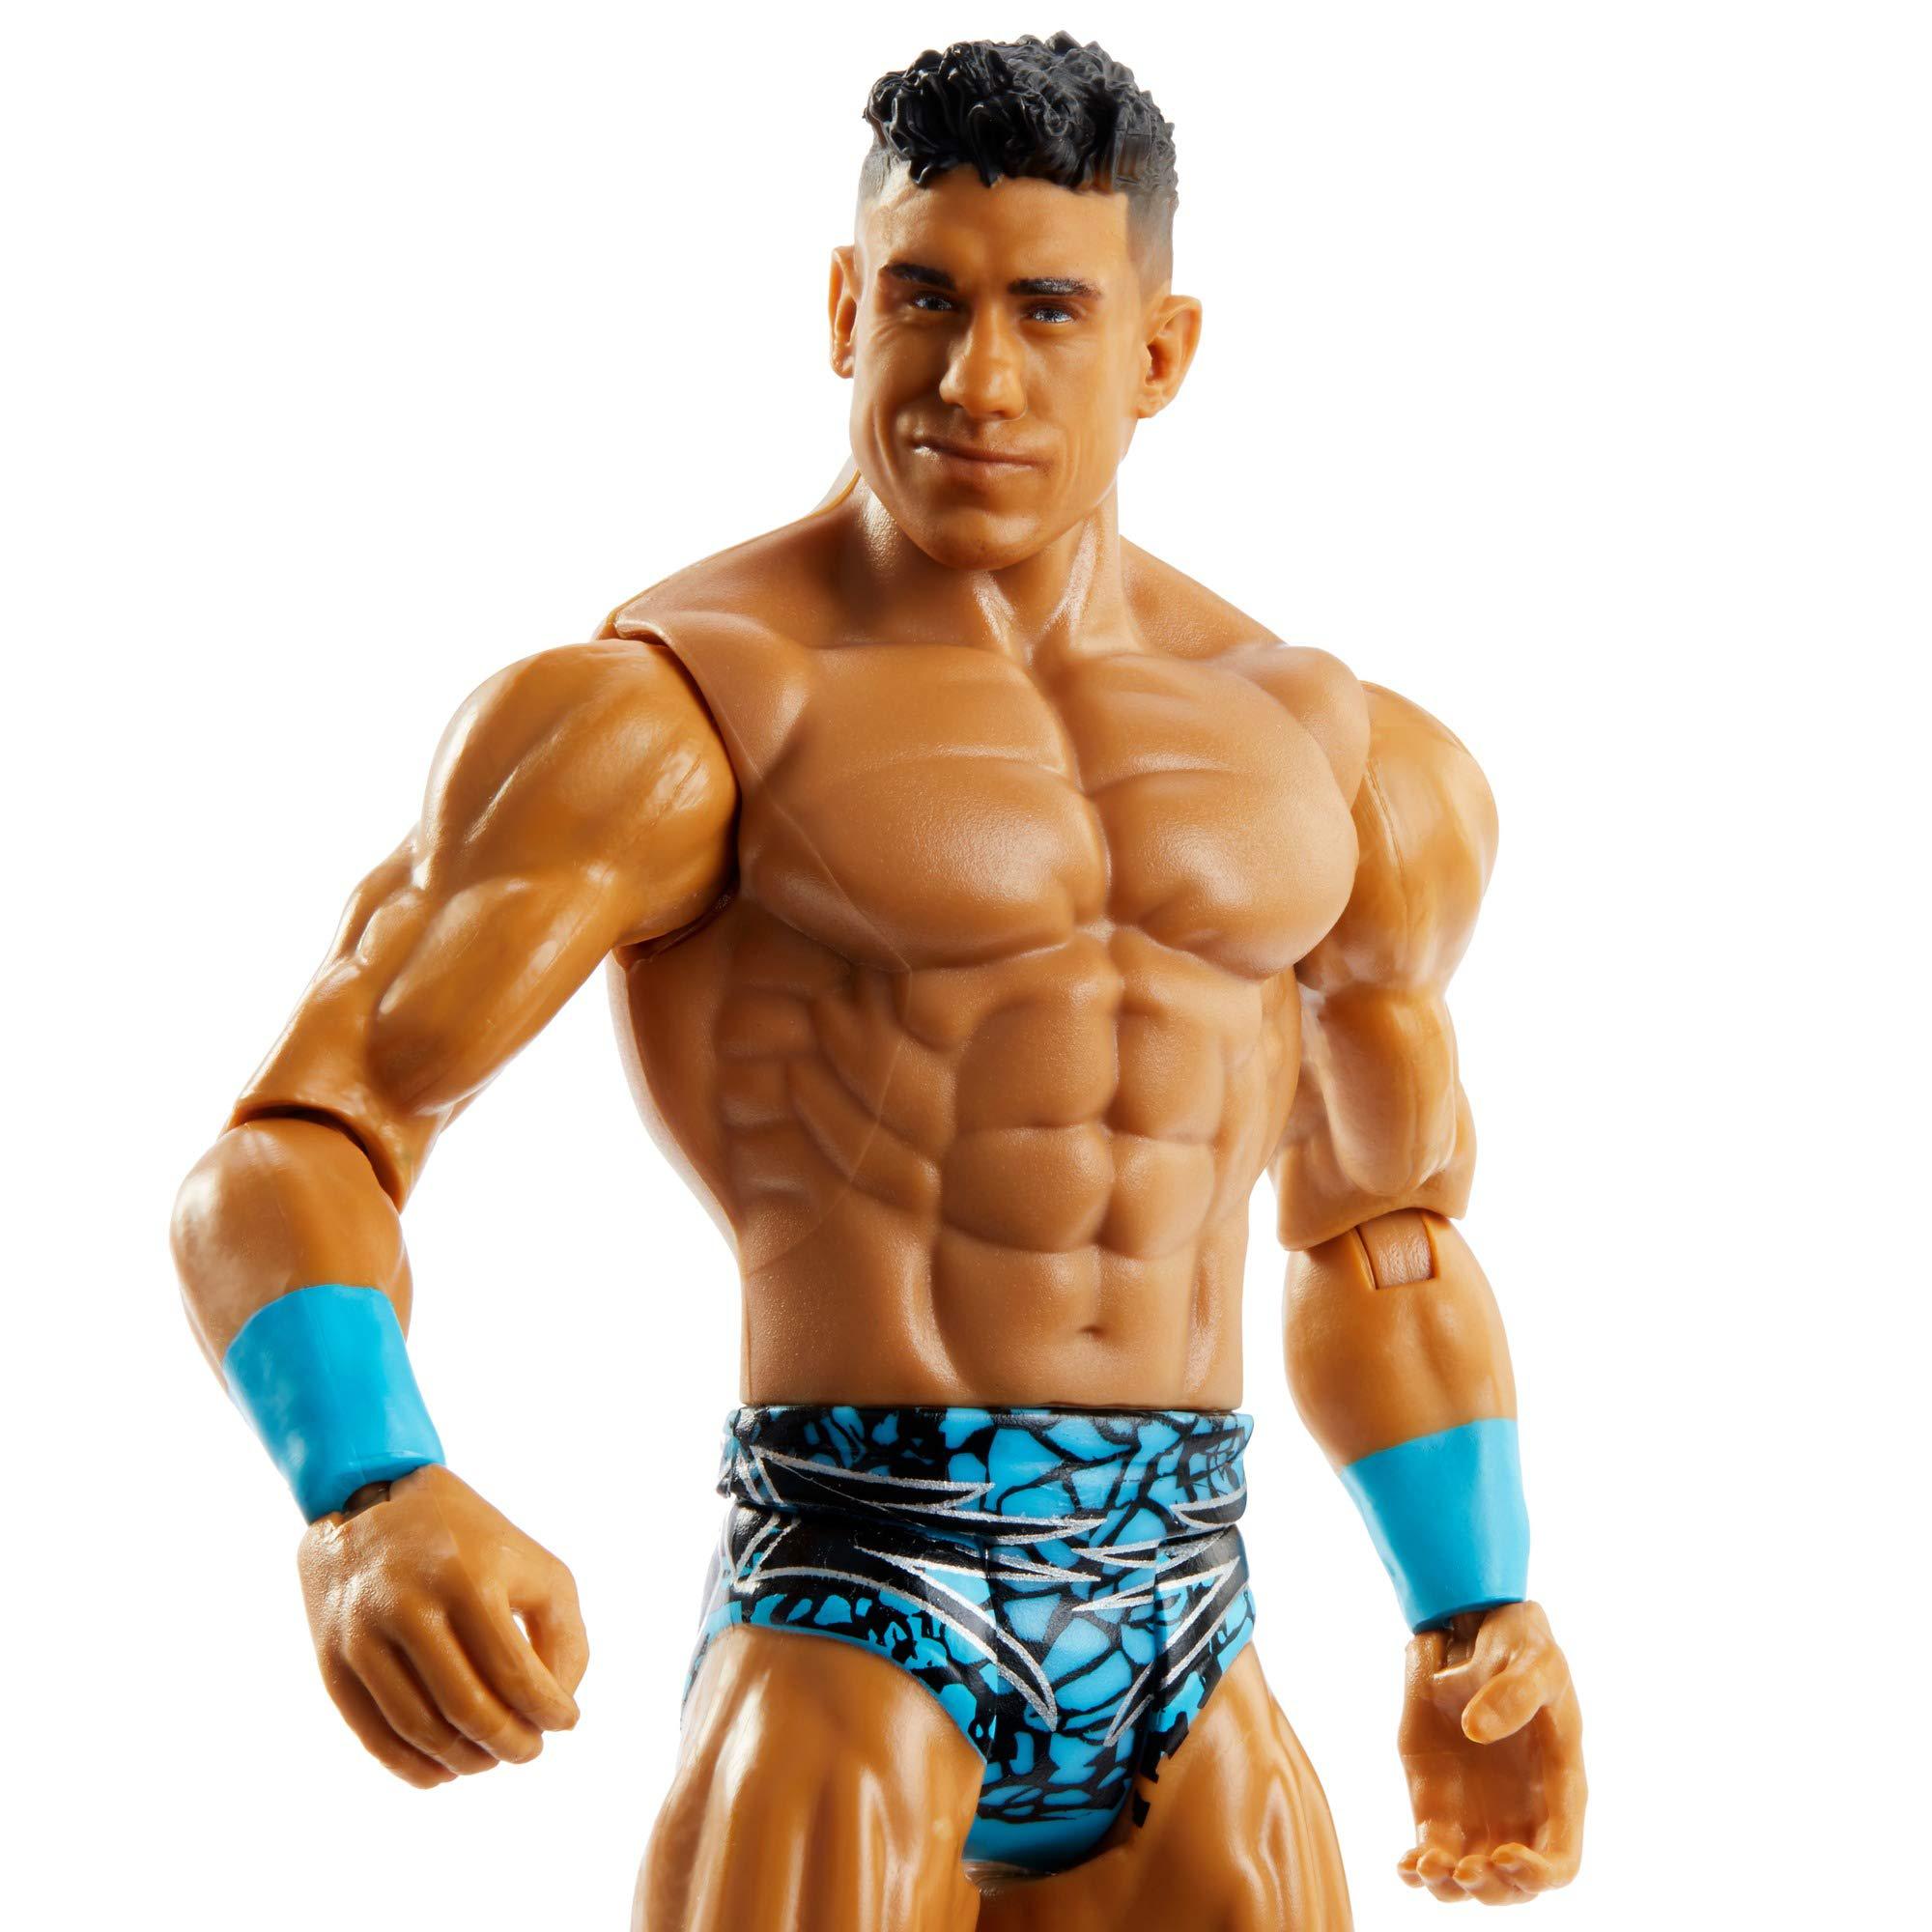 wwe mattel ec3 basic series #107 action figure in 6-inch scale with articulation & ring gear